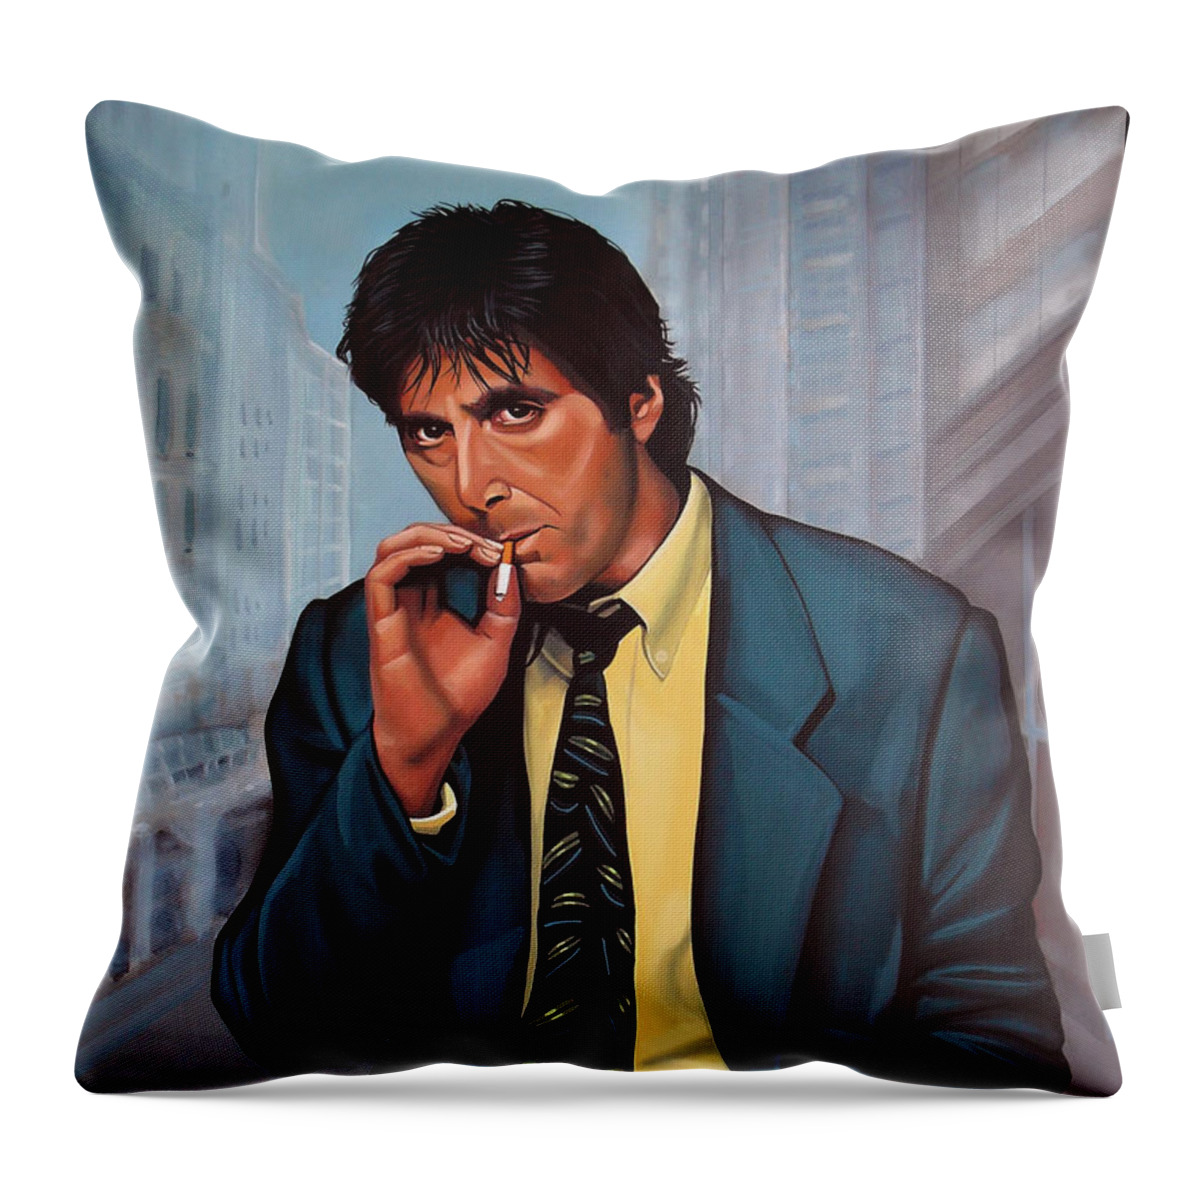 Al Pacino Throw Pillow featuring the painting Al Pacino 2 by Paul Meijering